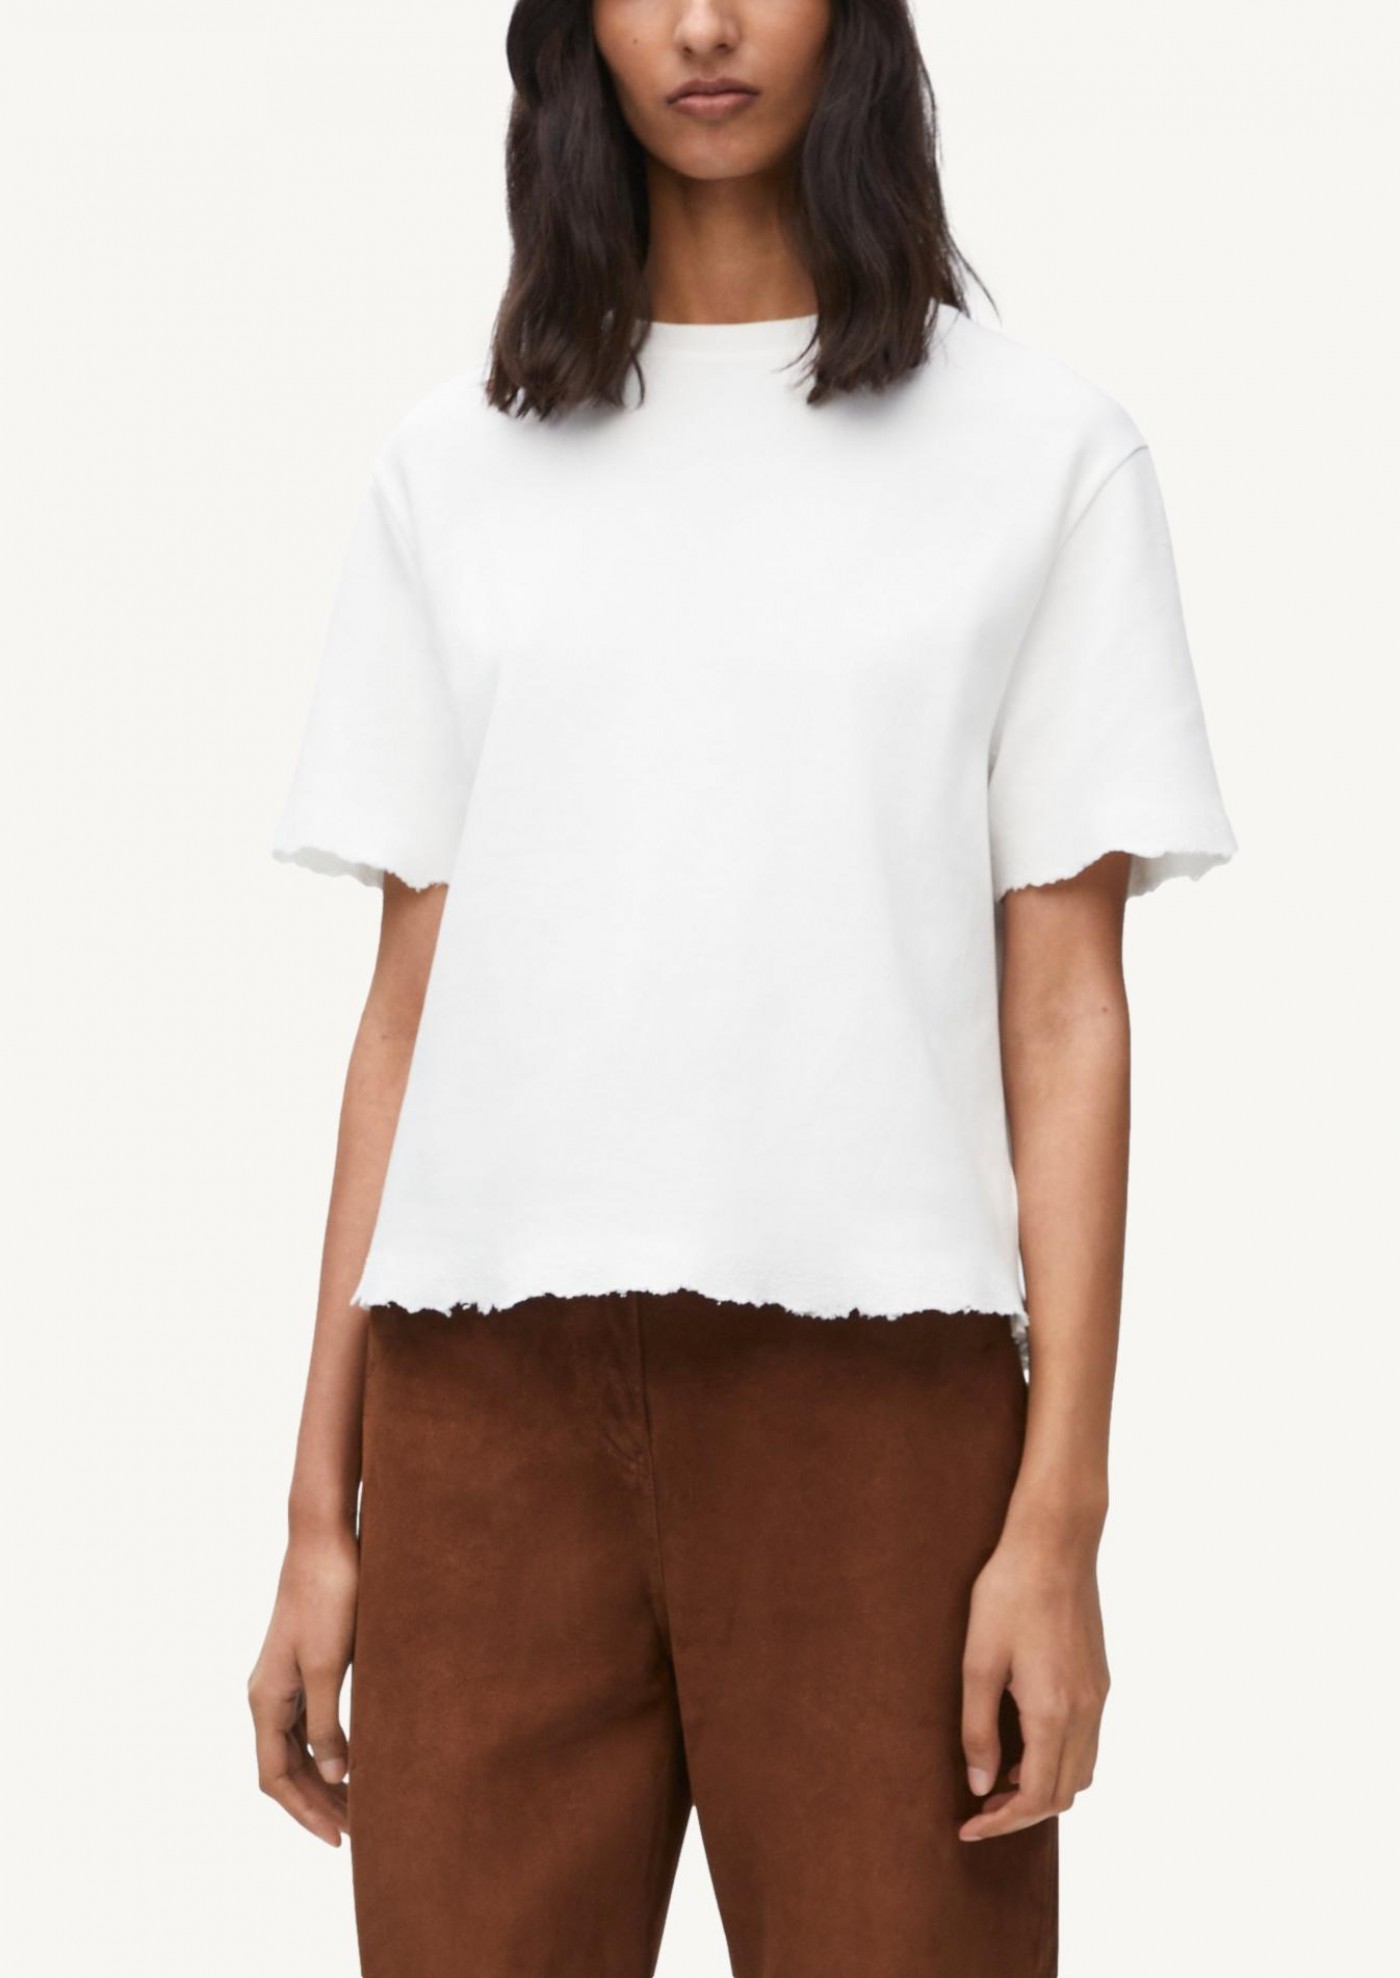 Boxy fit t-shirt in cotton blend